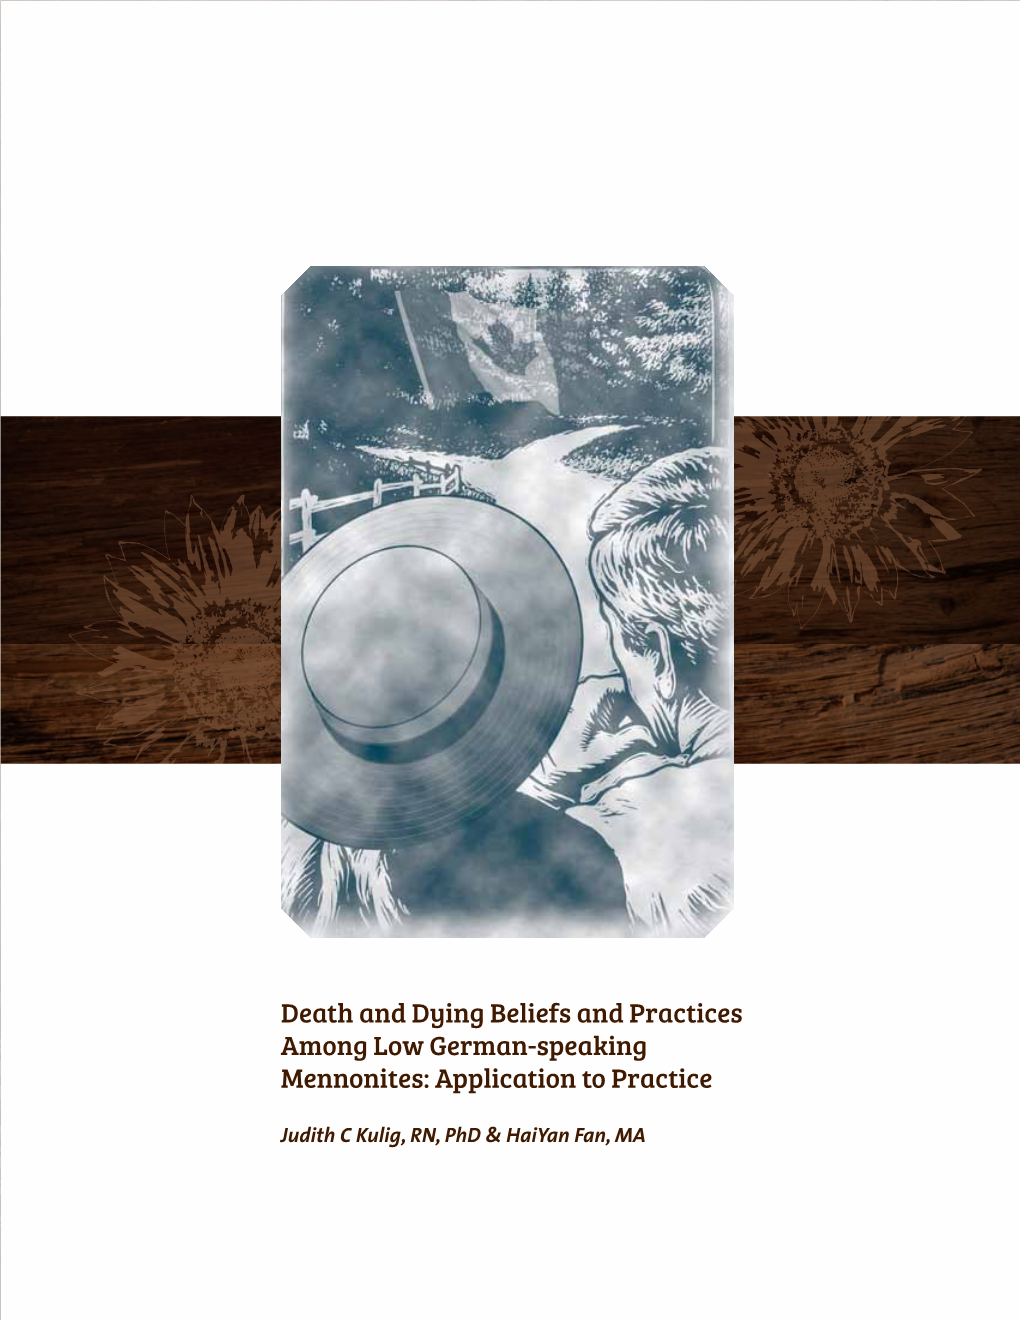 Death and Dying Beliefs and Practices Among Low German-Speaking Mennonites: Application to Practice